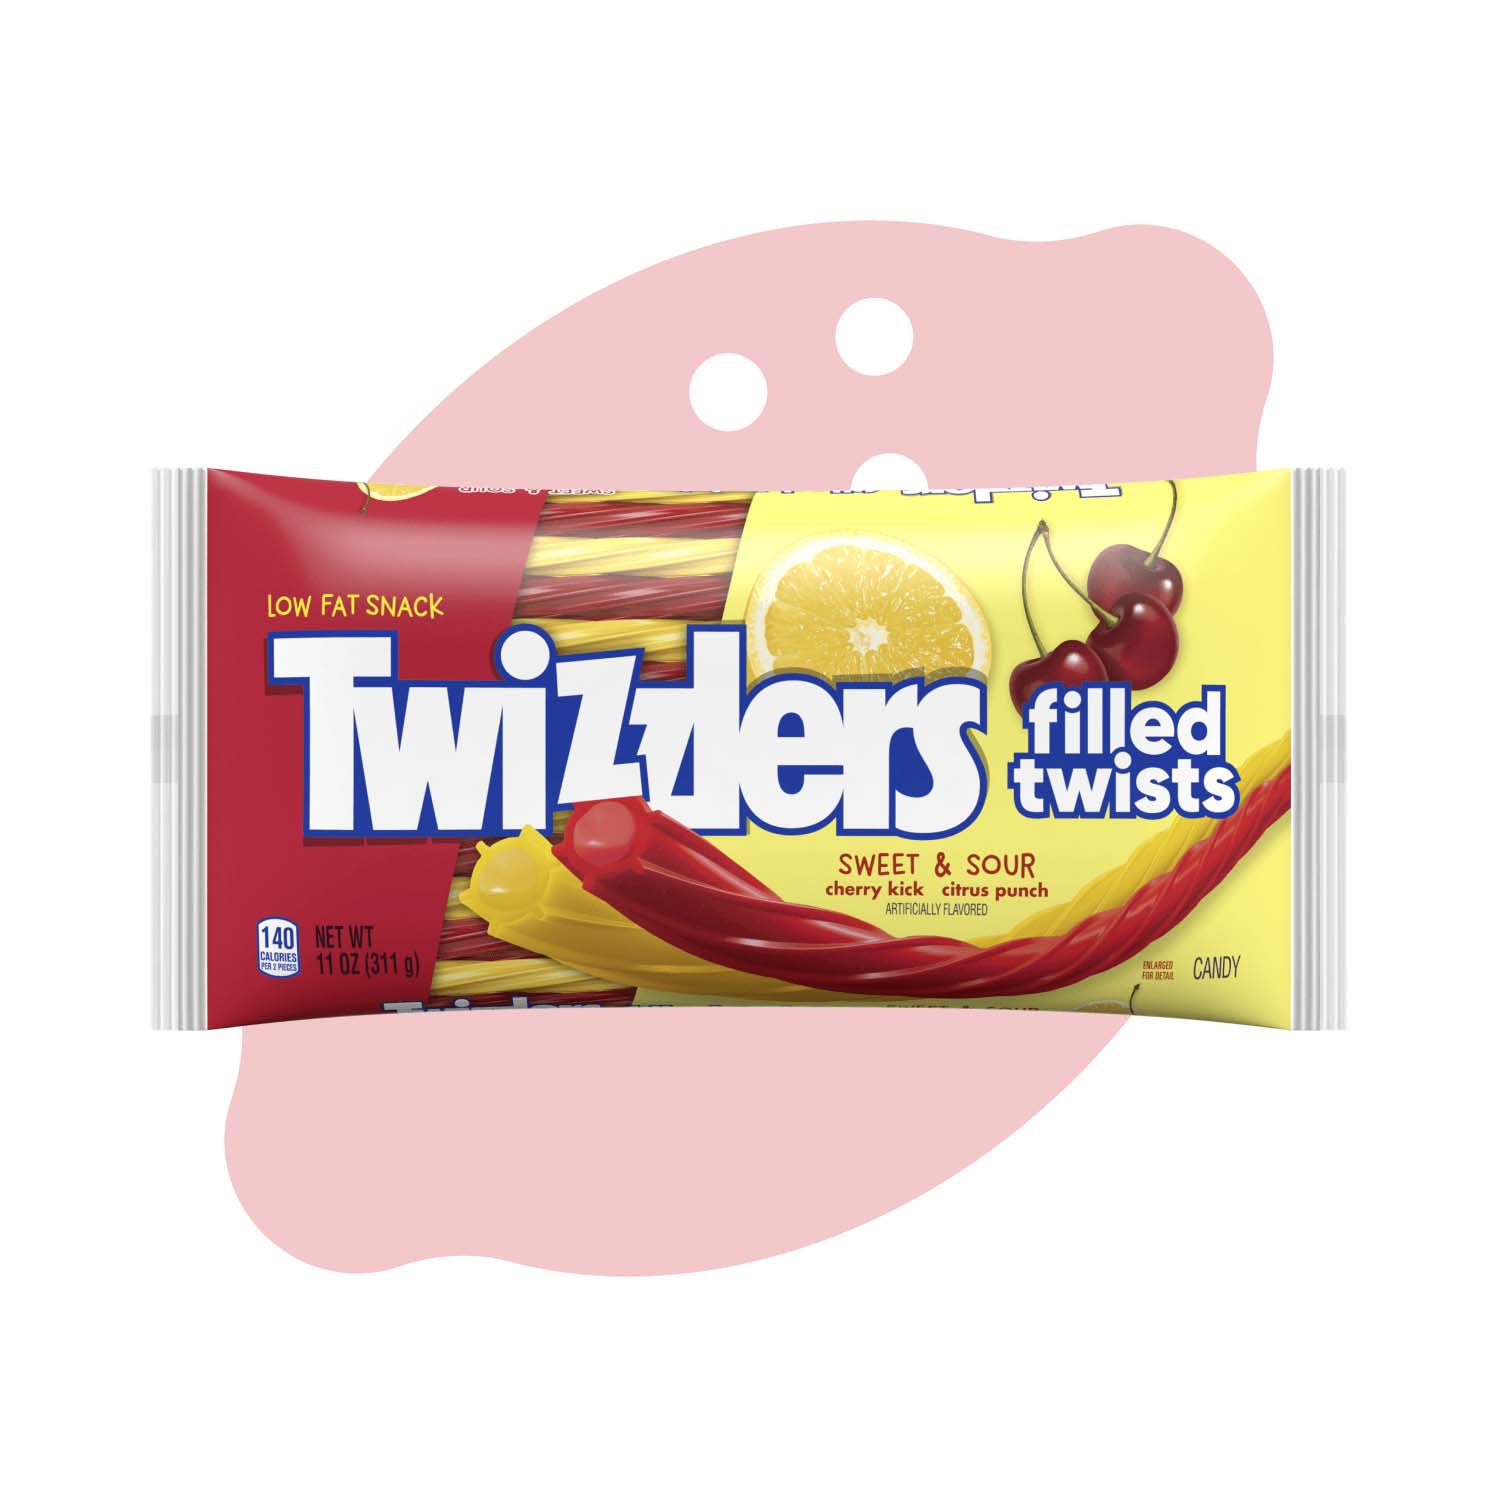 bag of twizzlers filled twists sweet and sour candy